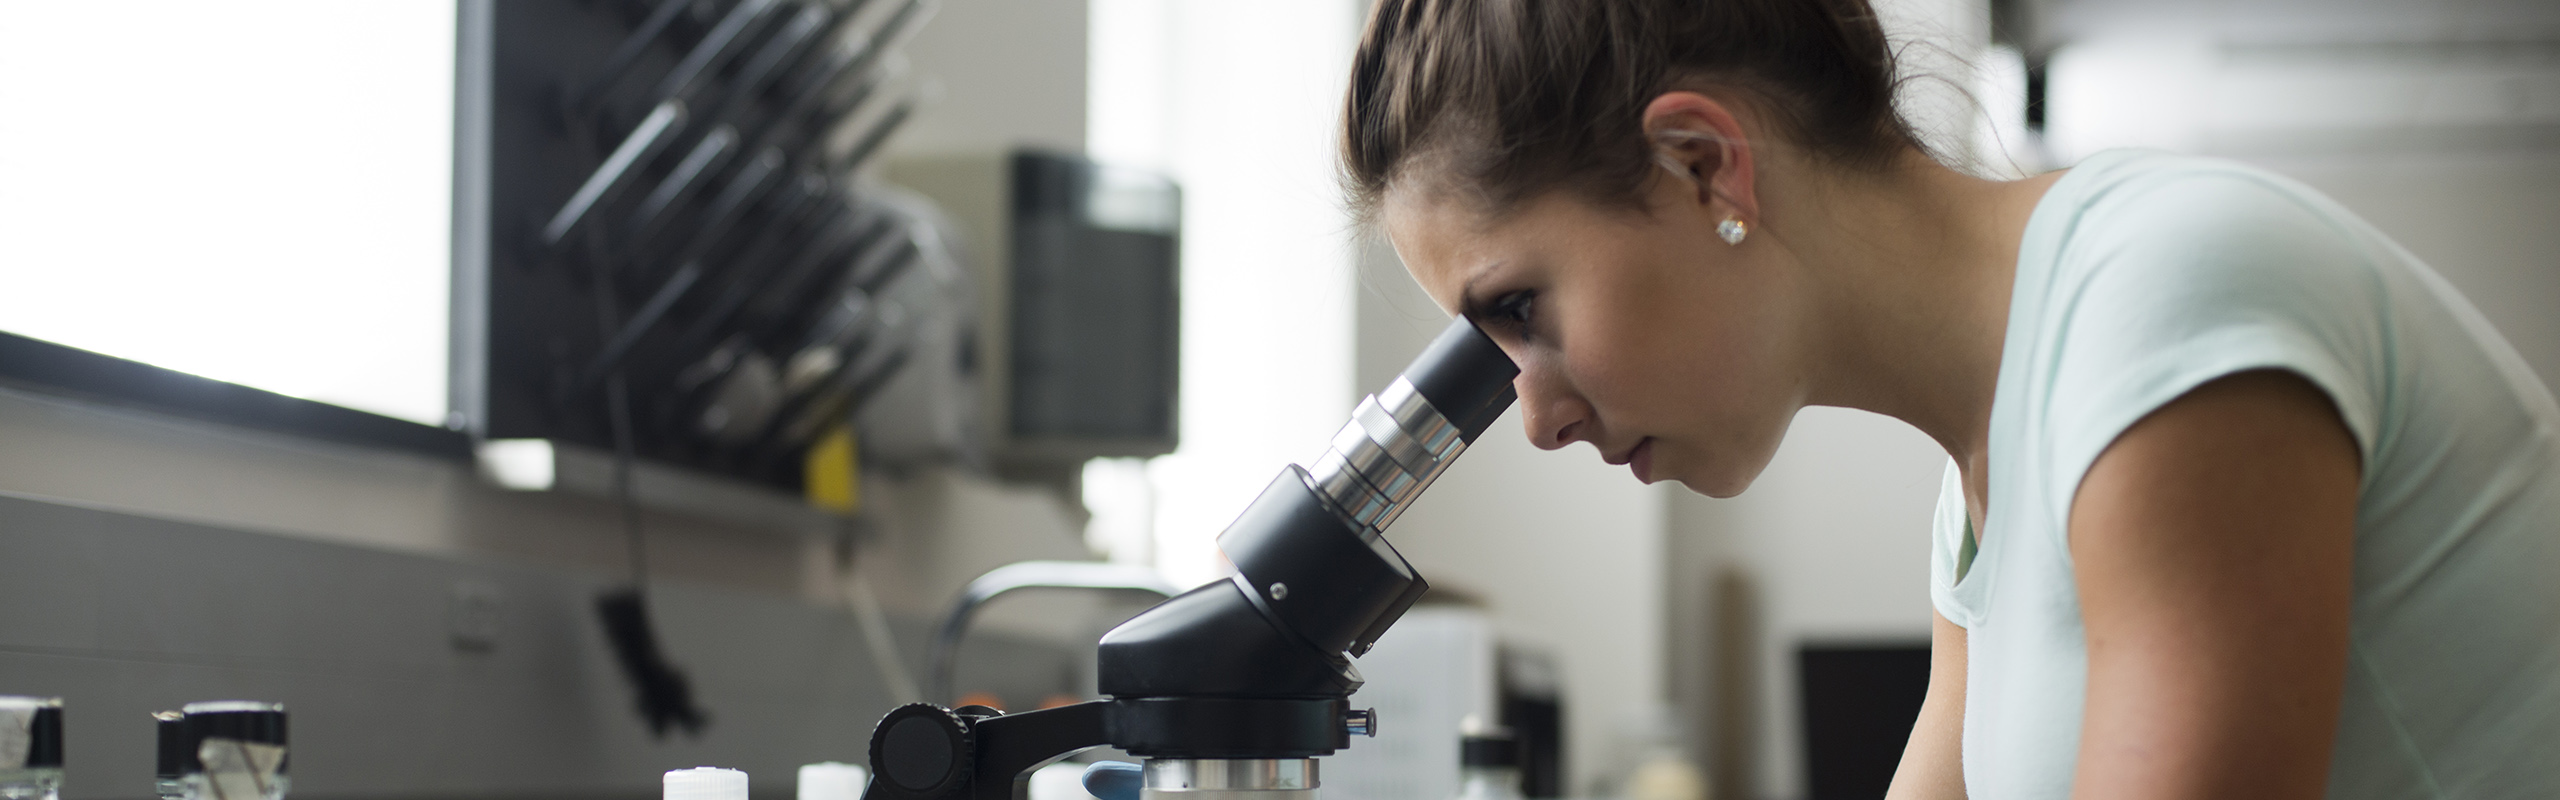 Caitlin Lawyer '15 works in the biology lab in McEwen.